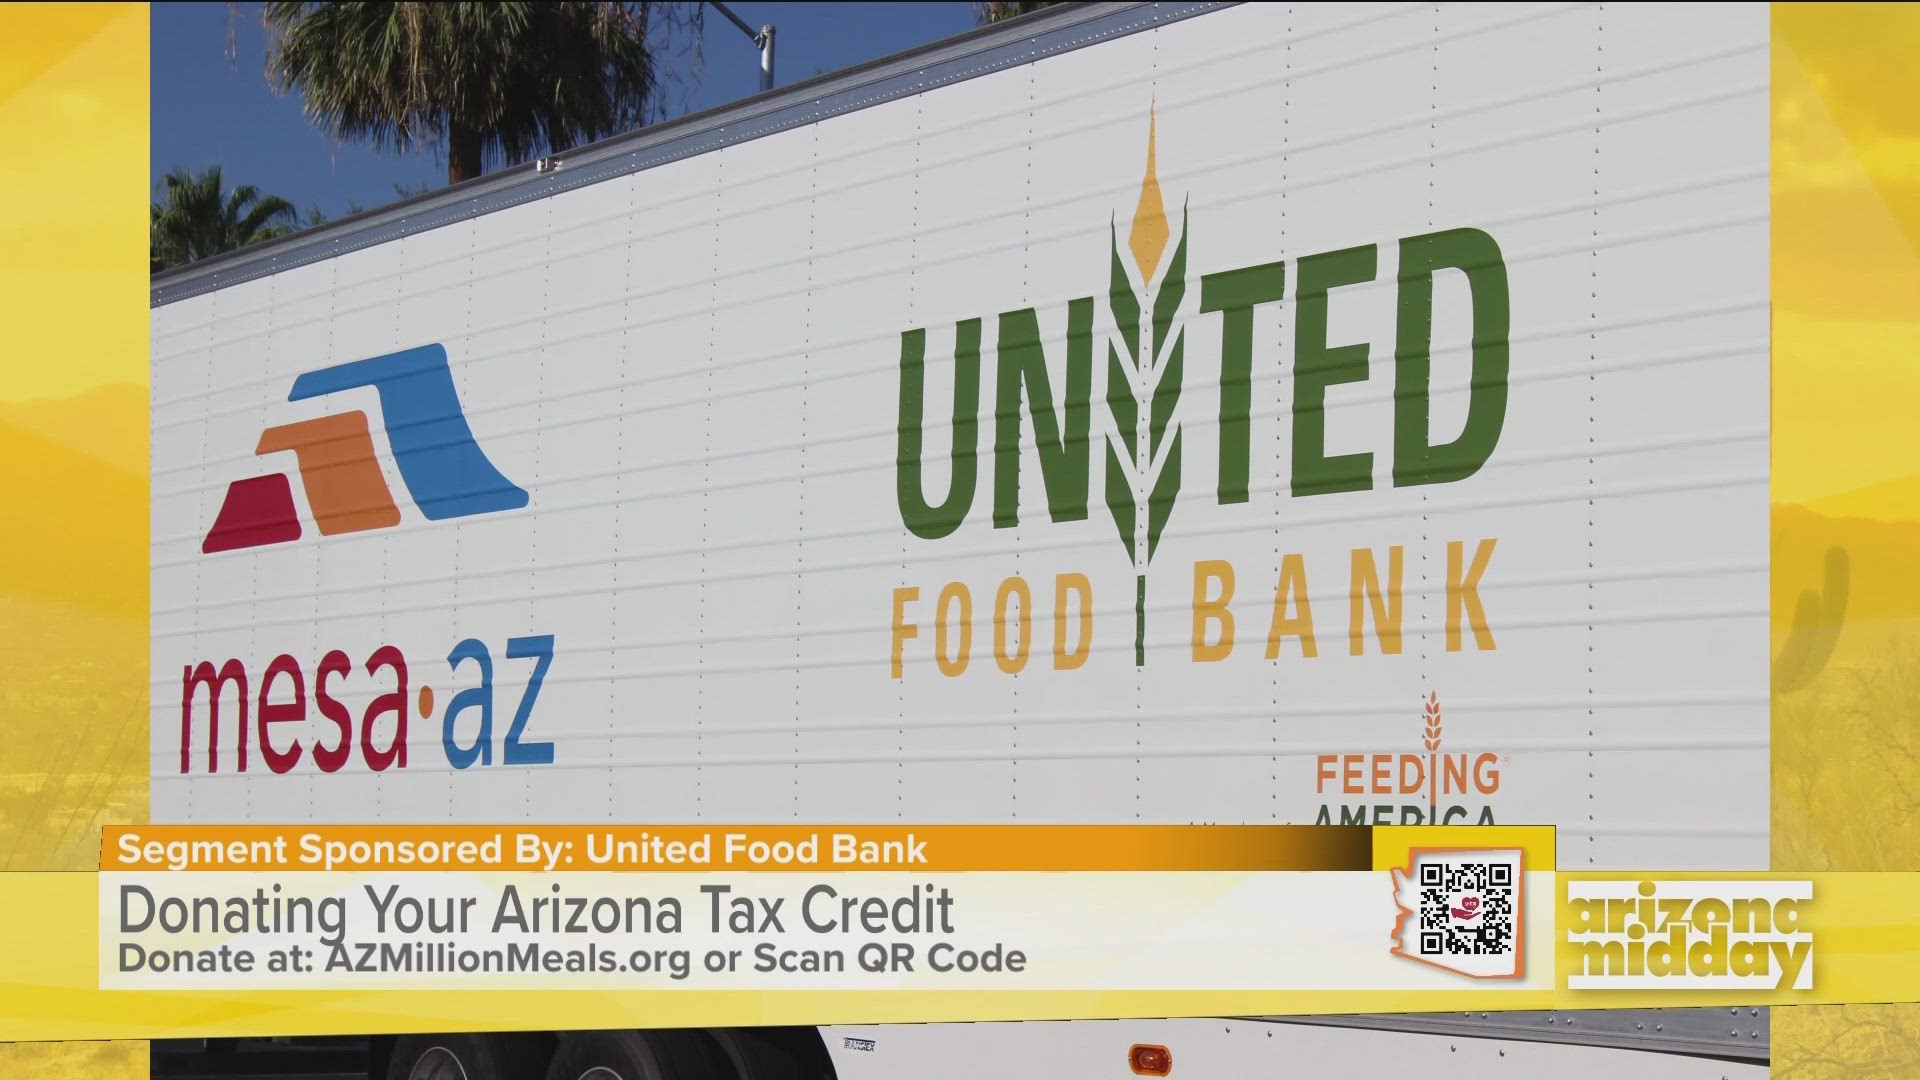 Melissa Nelson and Shelly Winson explain how you can donate your Arizona Tax Credit to support United Food Bank and how the money benefits the community.